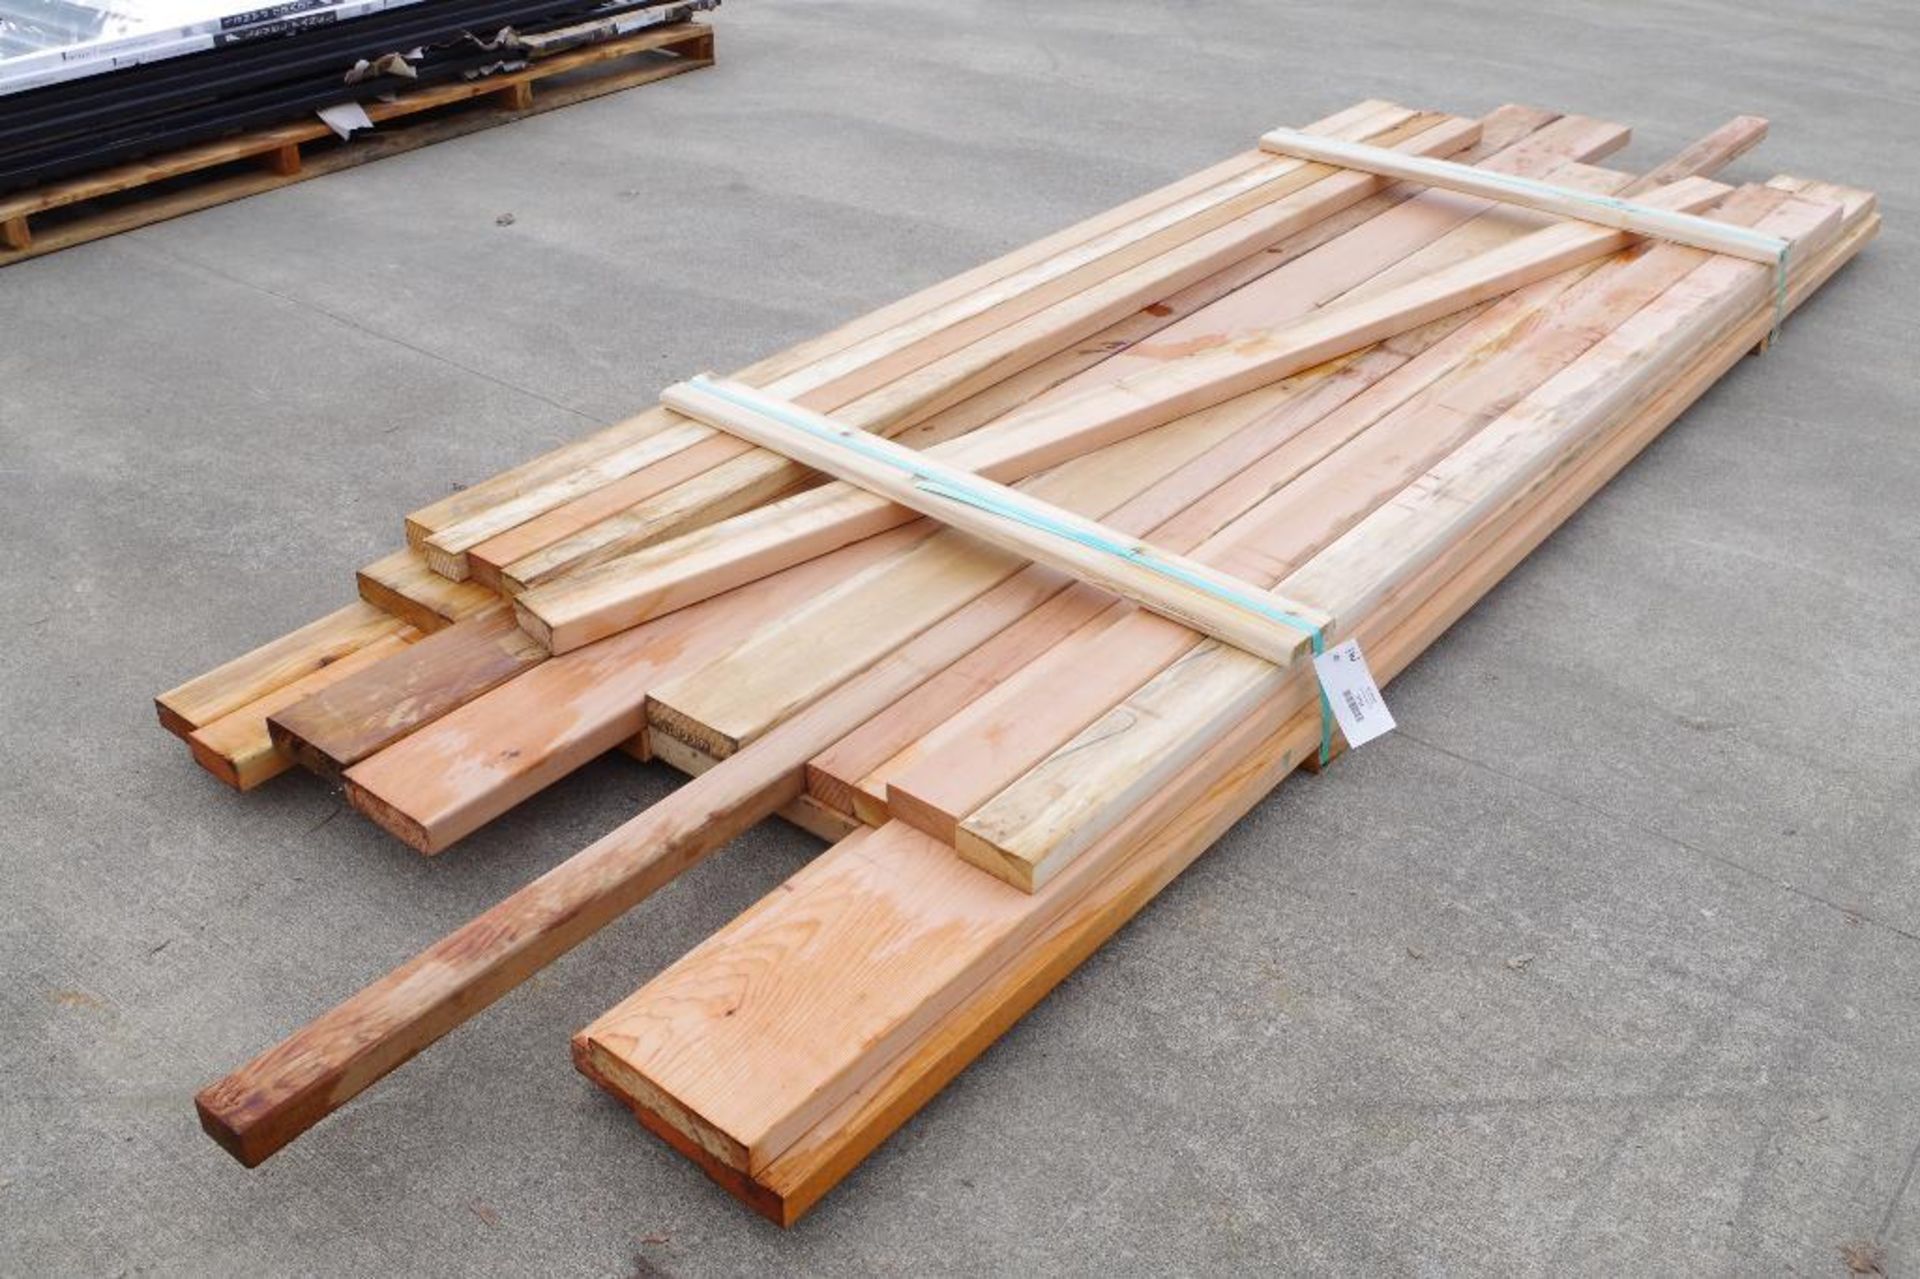 [QTY] Clear Cedar Boards, 2x8, 2x6's, 2x4's & 2x3's, Lengths up to 10'